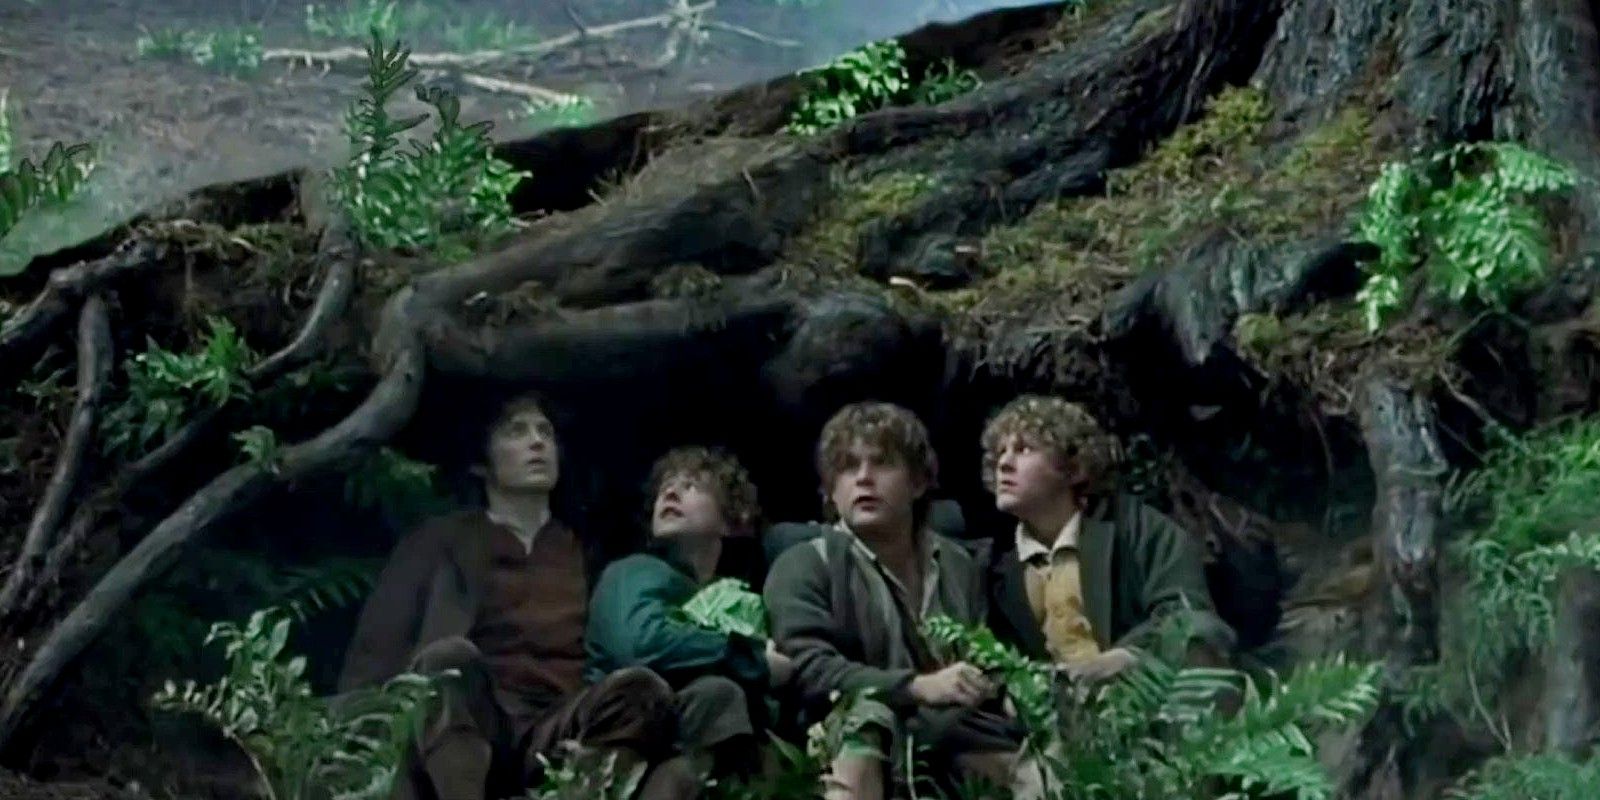 Hobbits hiding in Fellowship of the Ring